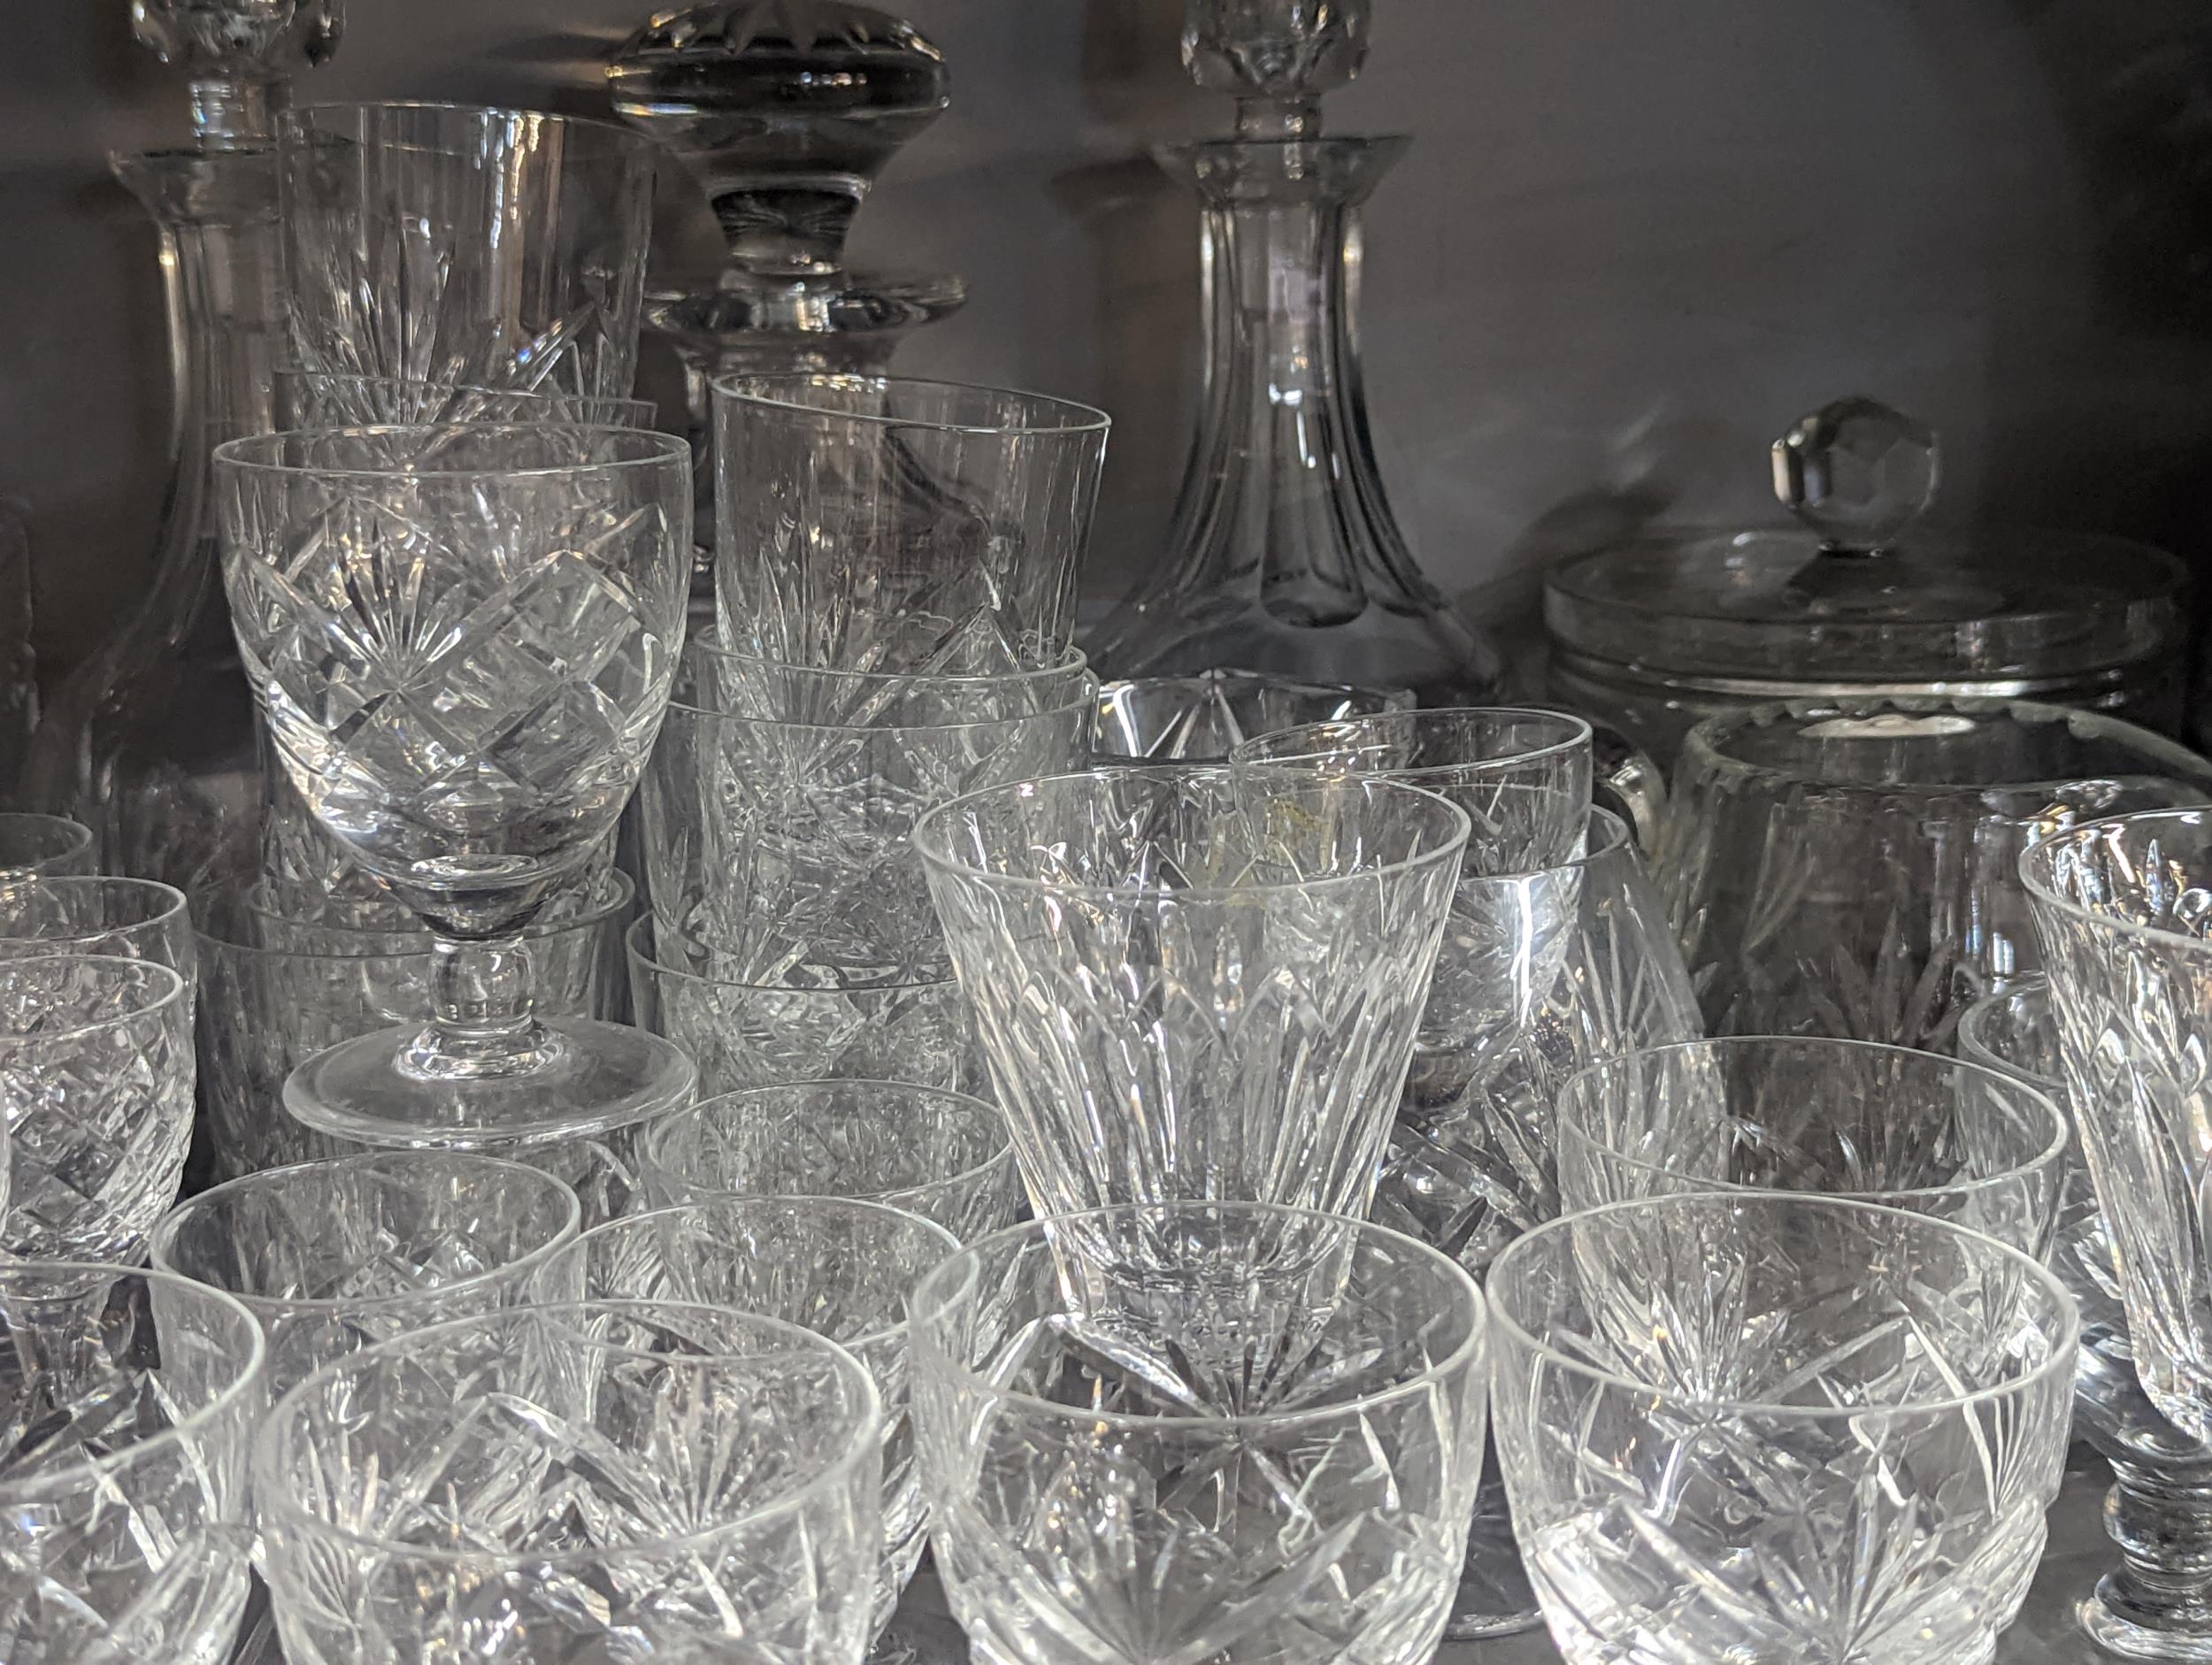 A group of domestic glassware to include cut glass decanters, cups, dishes, bowls and others - Image 3 of 5